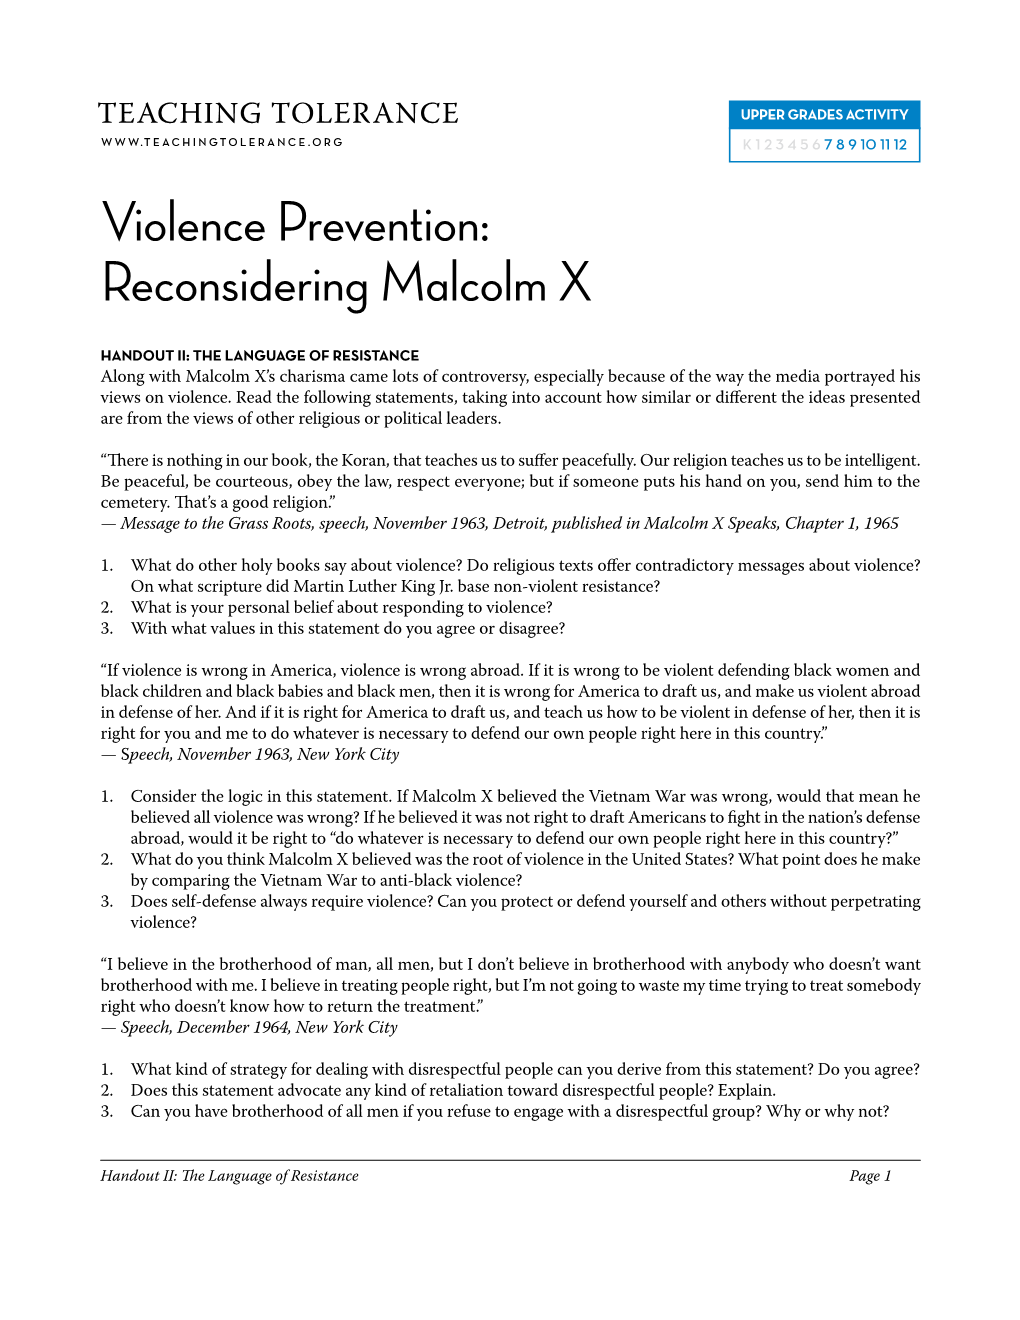 Violence Prevention: Reconsidering Malcolm X